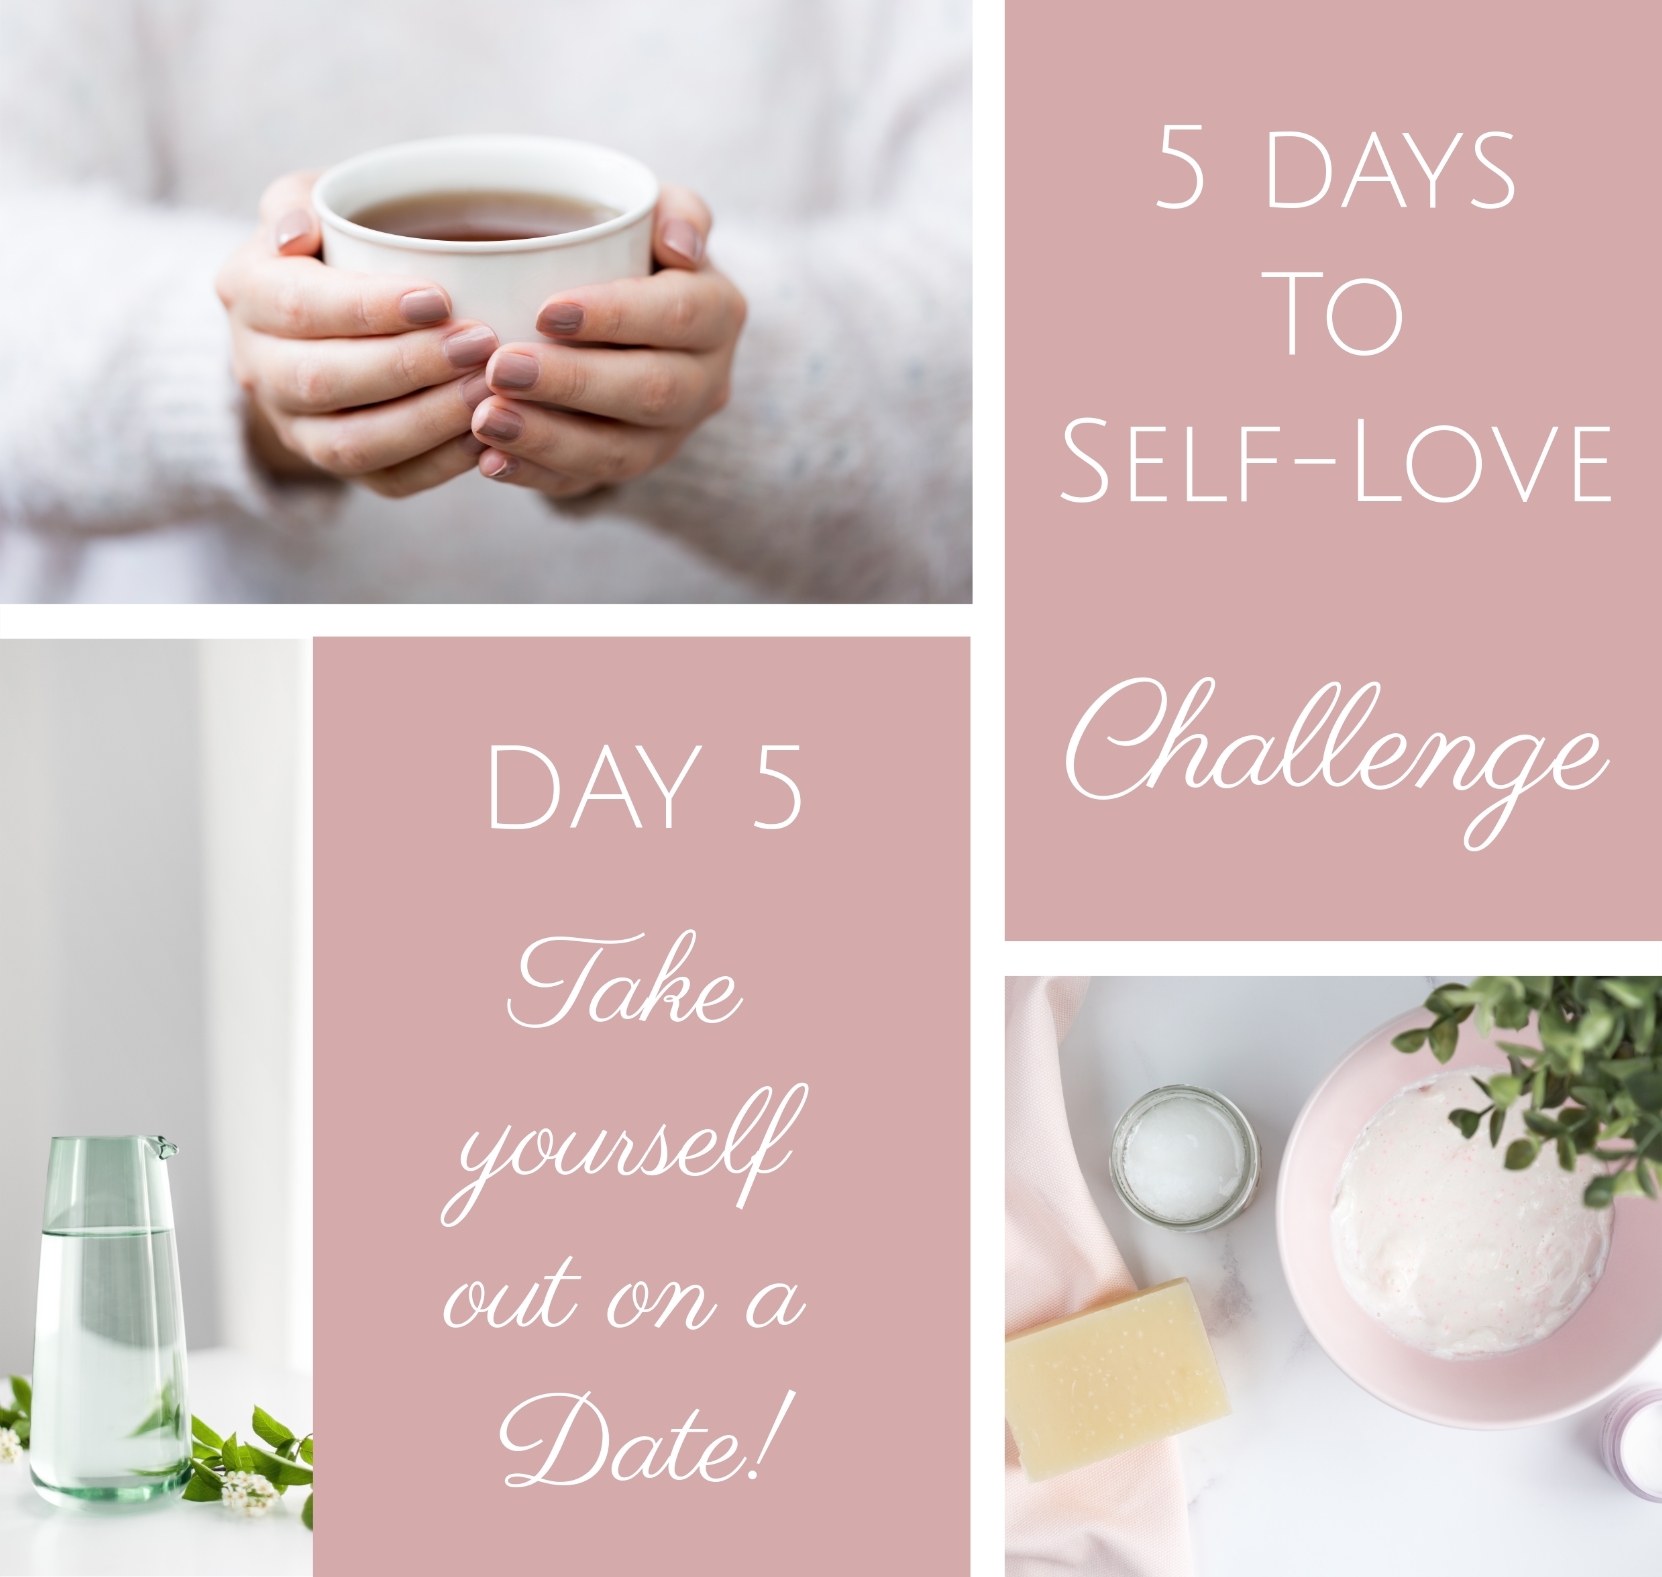 5 days to self-love - Date